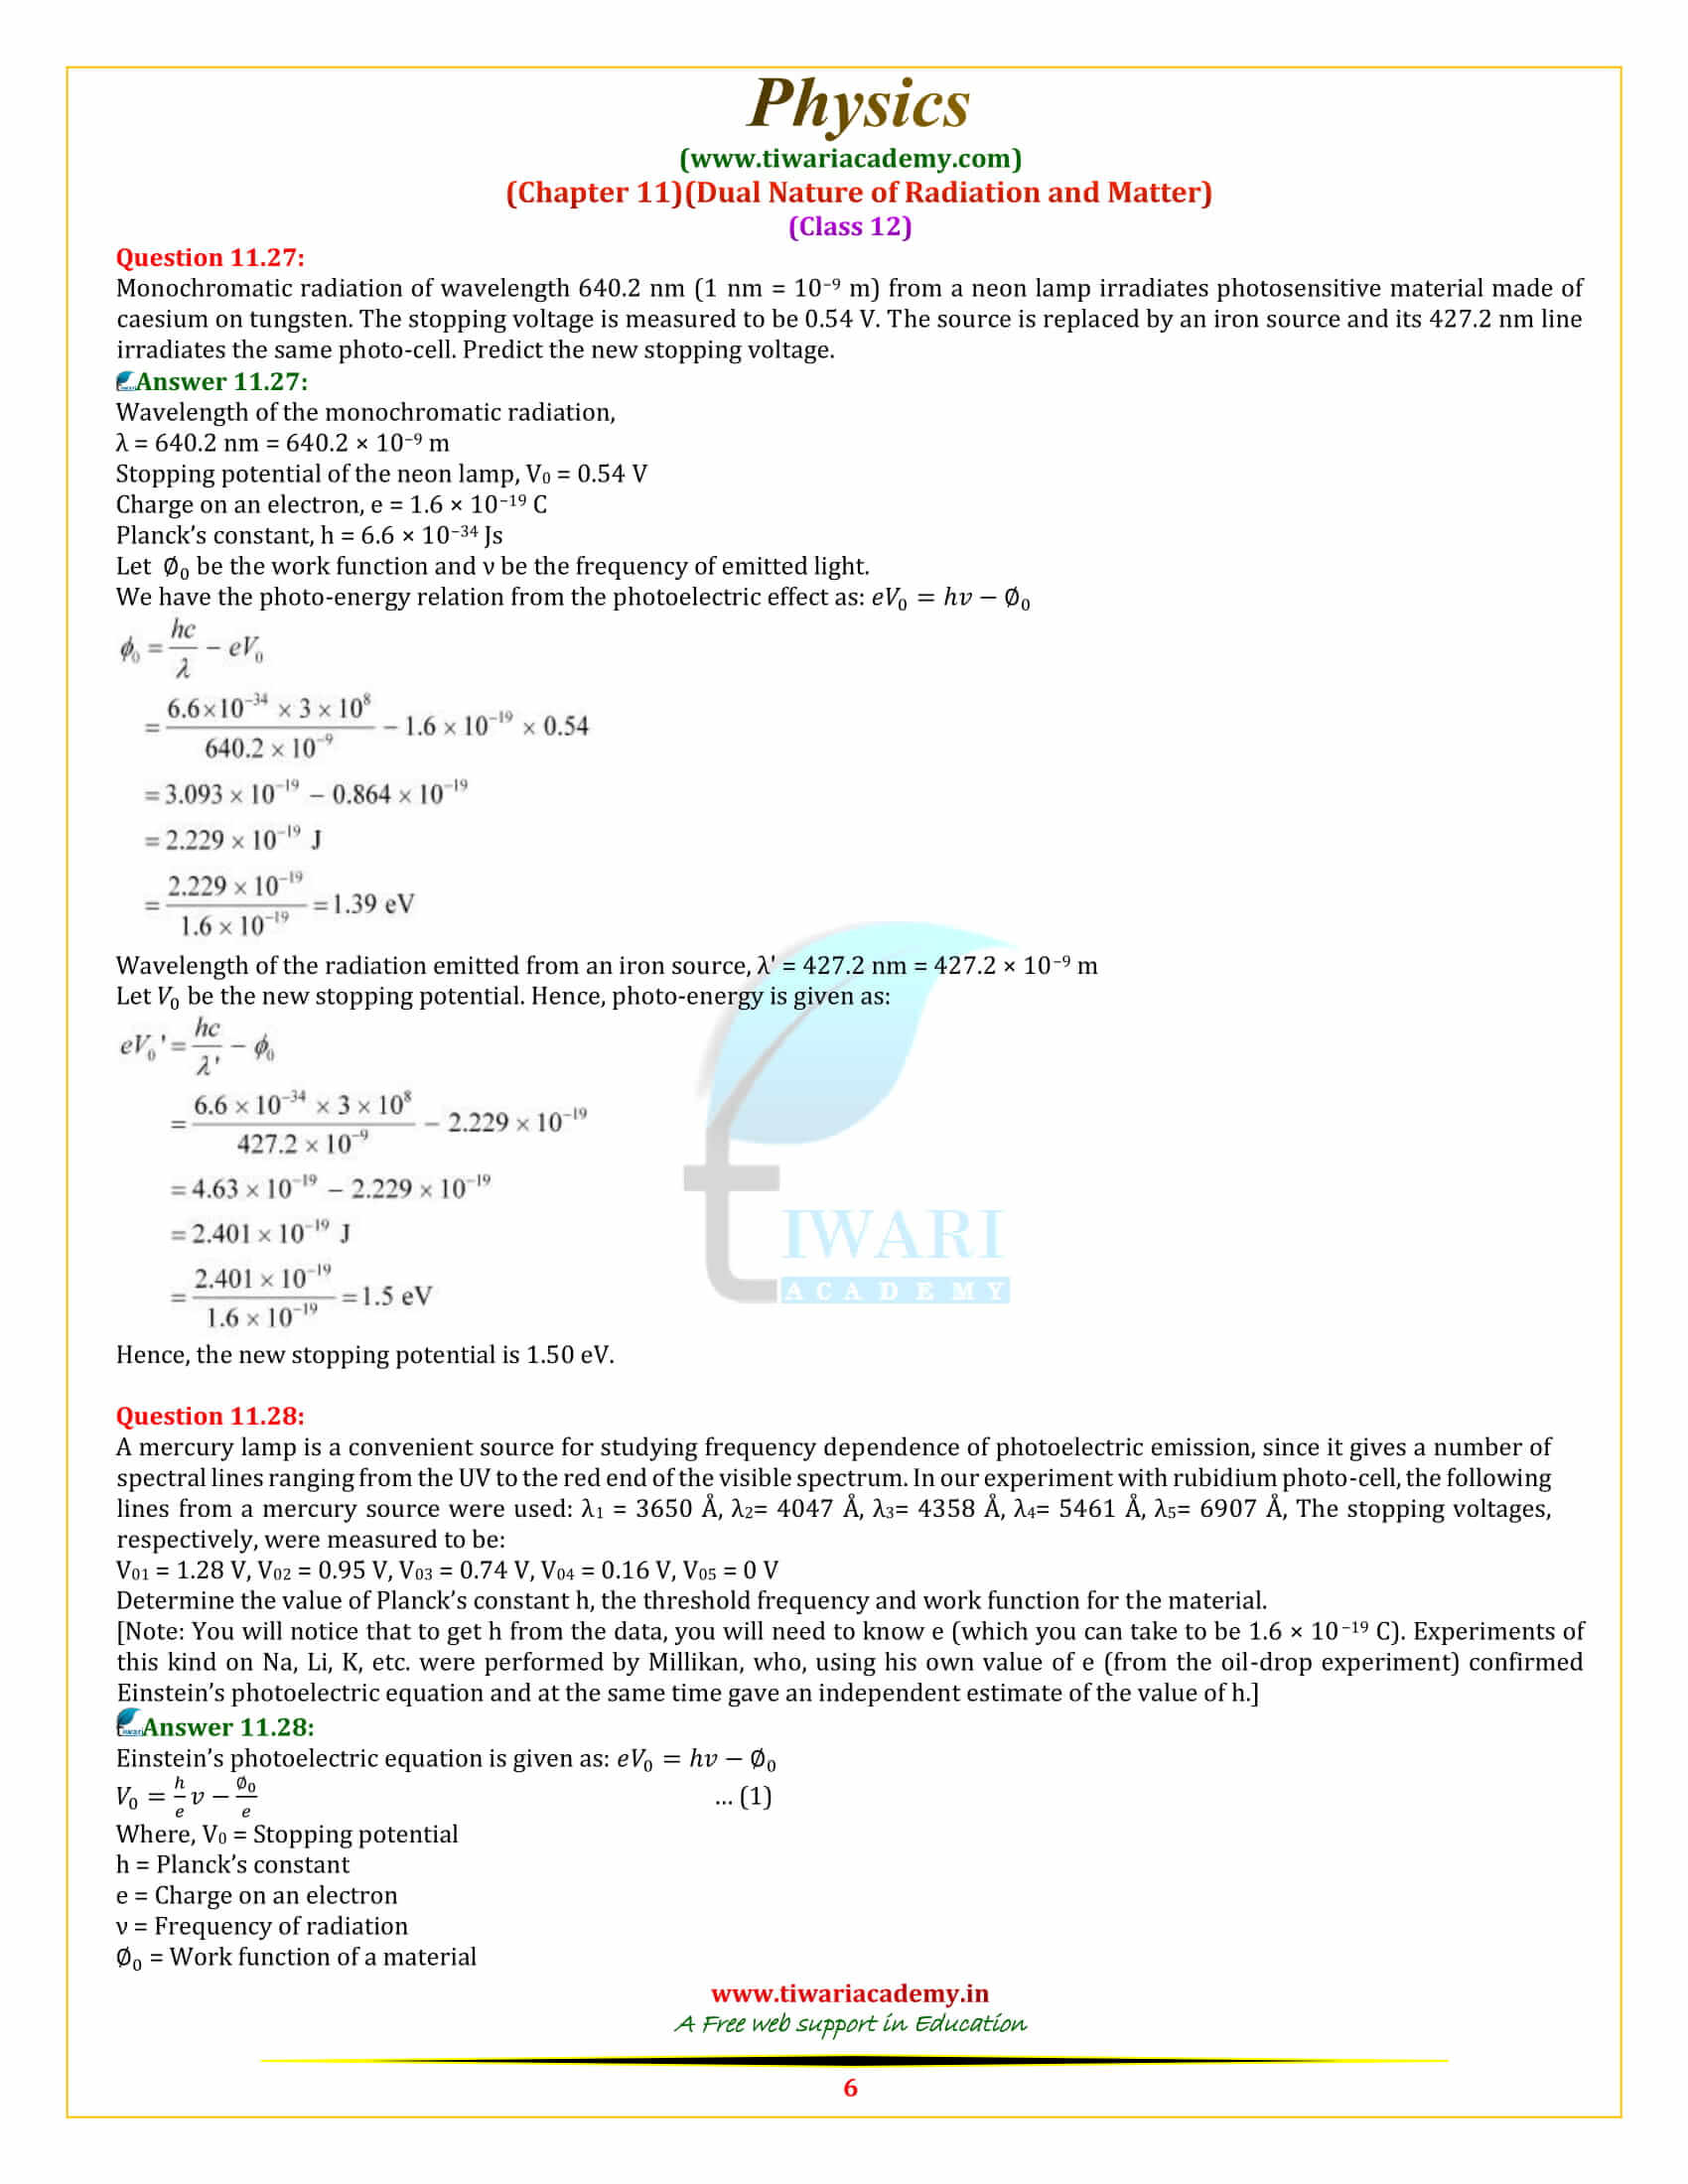 12 Physics Chapter 11 Dual Nature of Radiation and Matter additional exercises download in free pdf